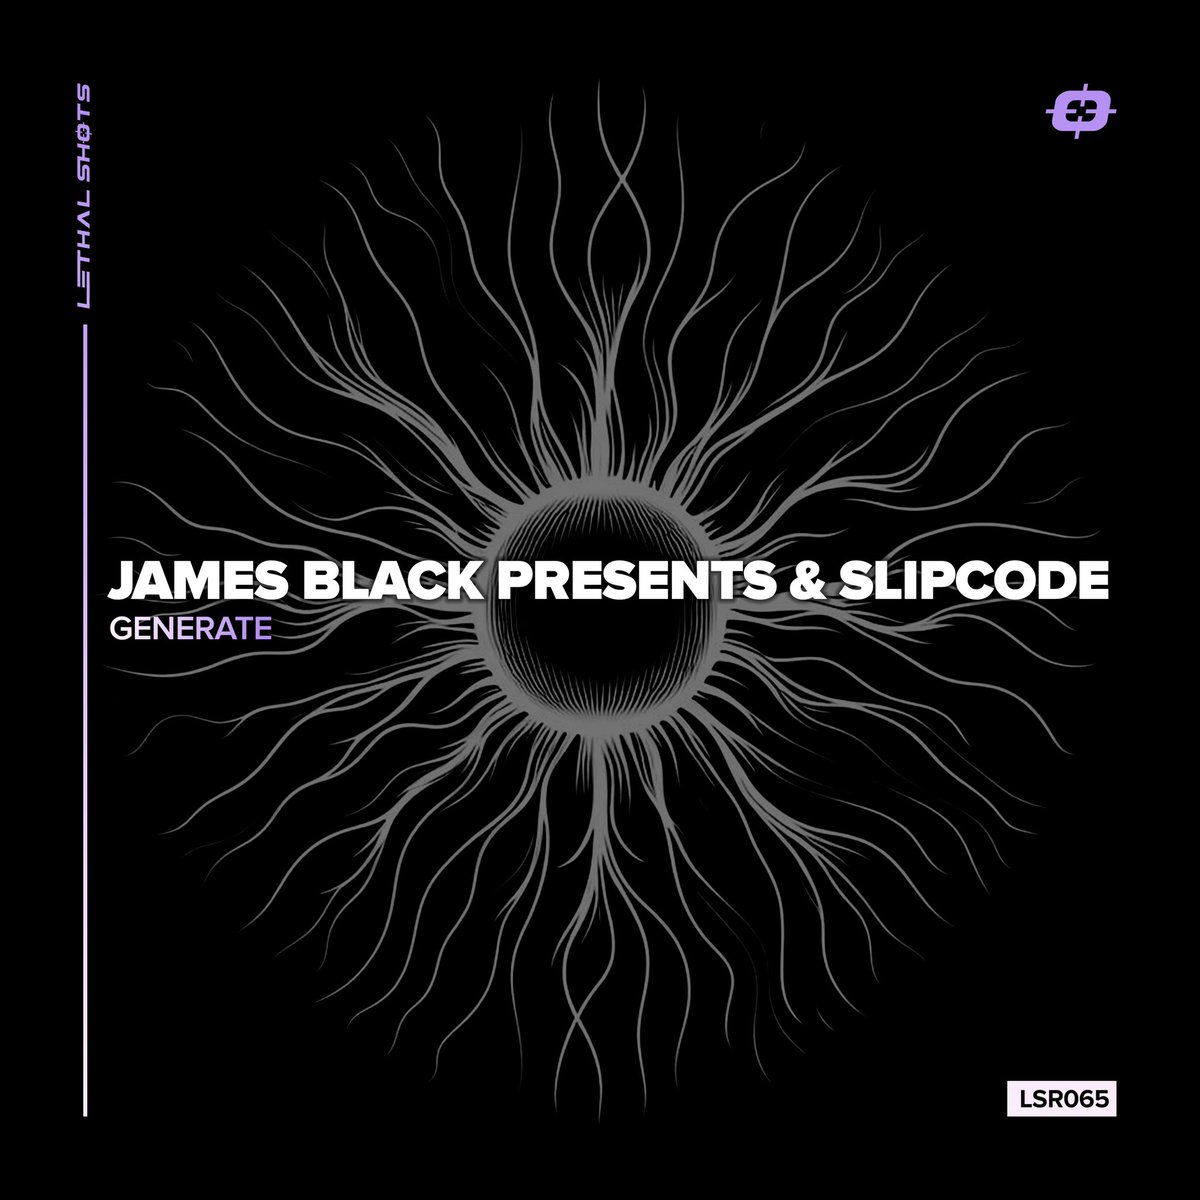 🙌🏻ARTWORK DROP!🙌🏻 Out 31st May - James Black Presents & @DJslipcode - ‘Generate’ on @lethalshotsrec - You may have heard this track in our recent CodeBlack radio shows & live sets! Can’t wait for this to come out! 

#NewMusic2024 #NewMusicAlert #techtrance #hardtrance #trance